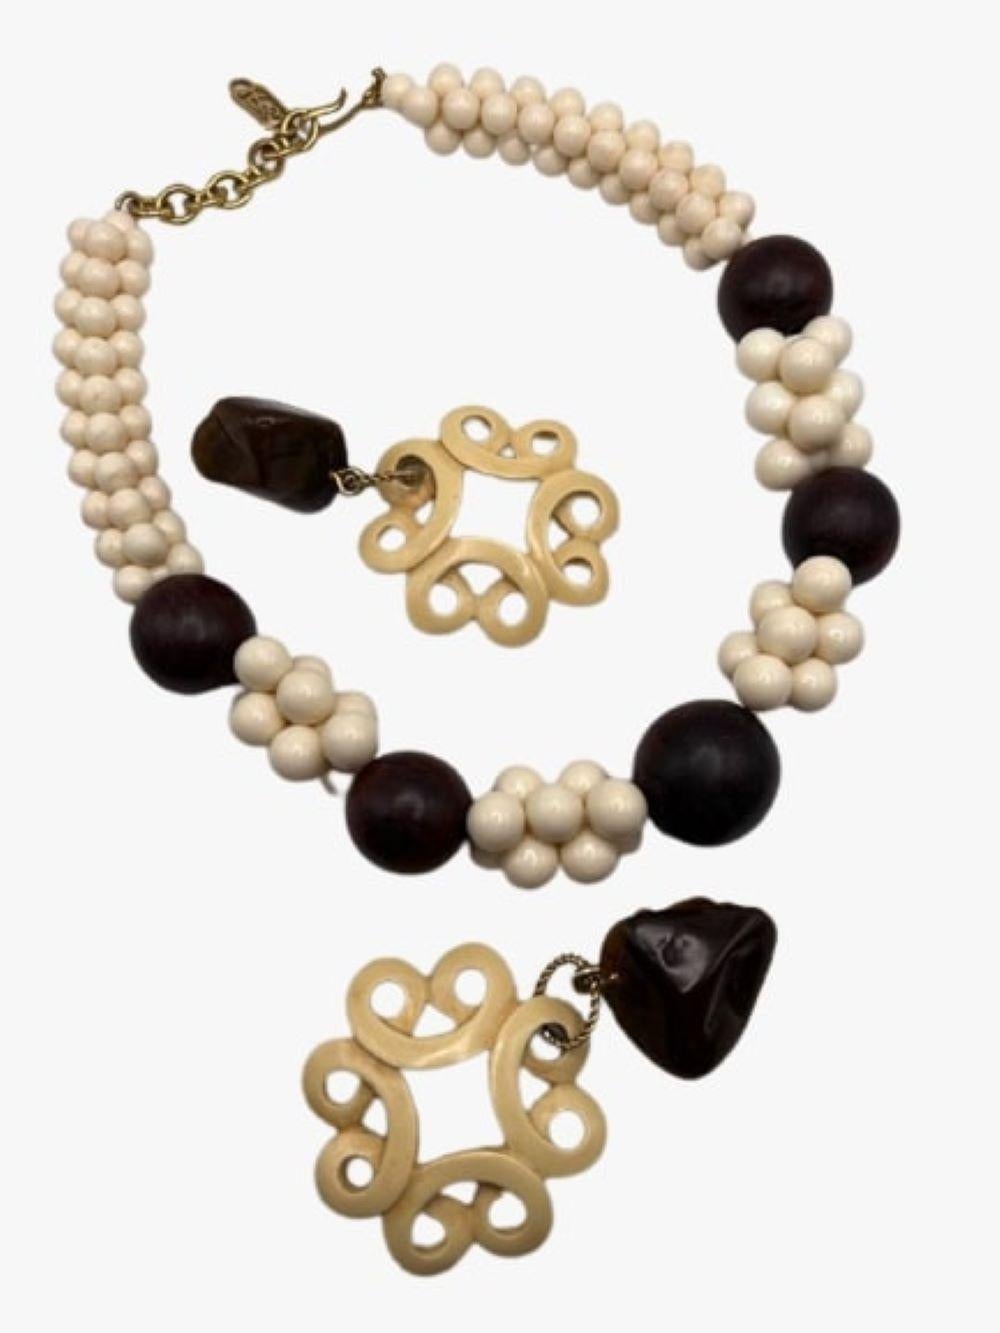 British Colonial Vintage Yves Saint Laurent Resin & Wood Bead African Collection Necklace, 1967 For Sale